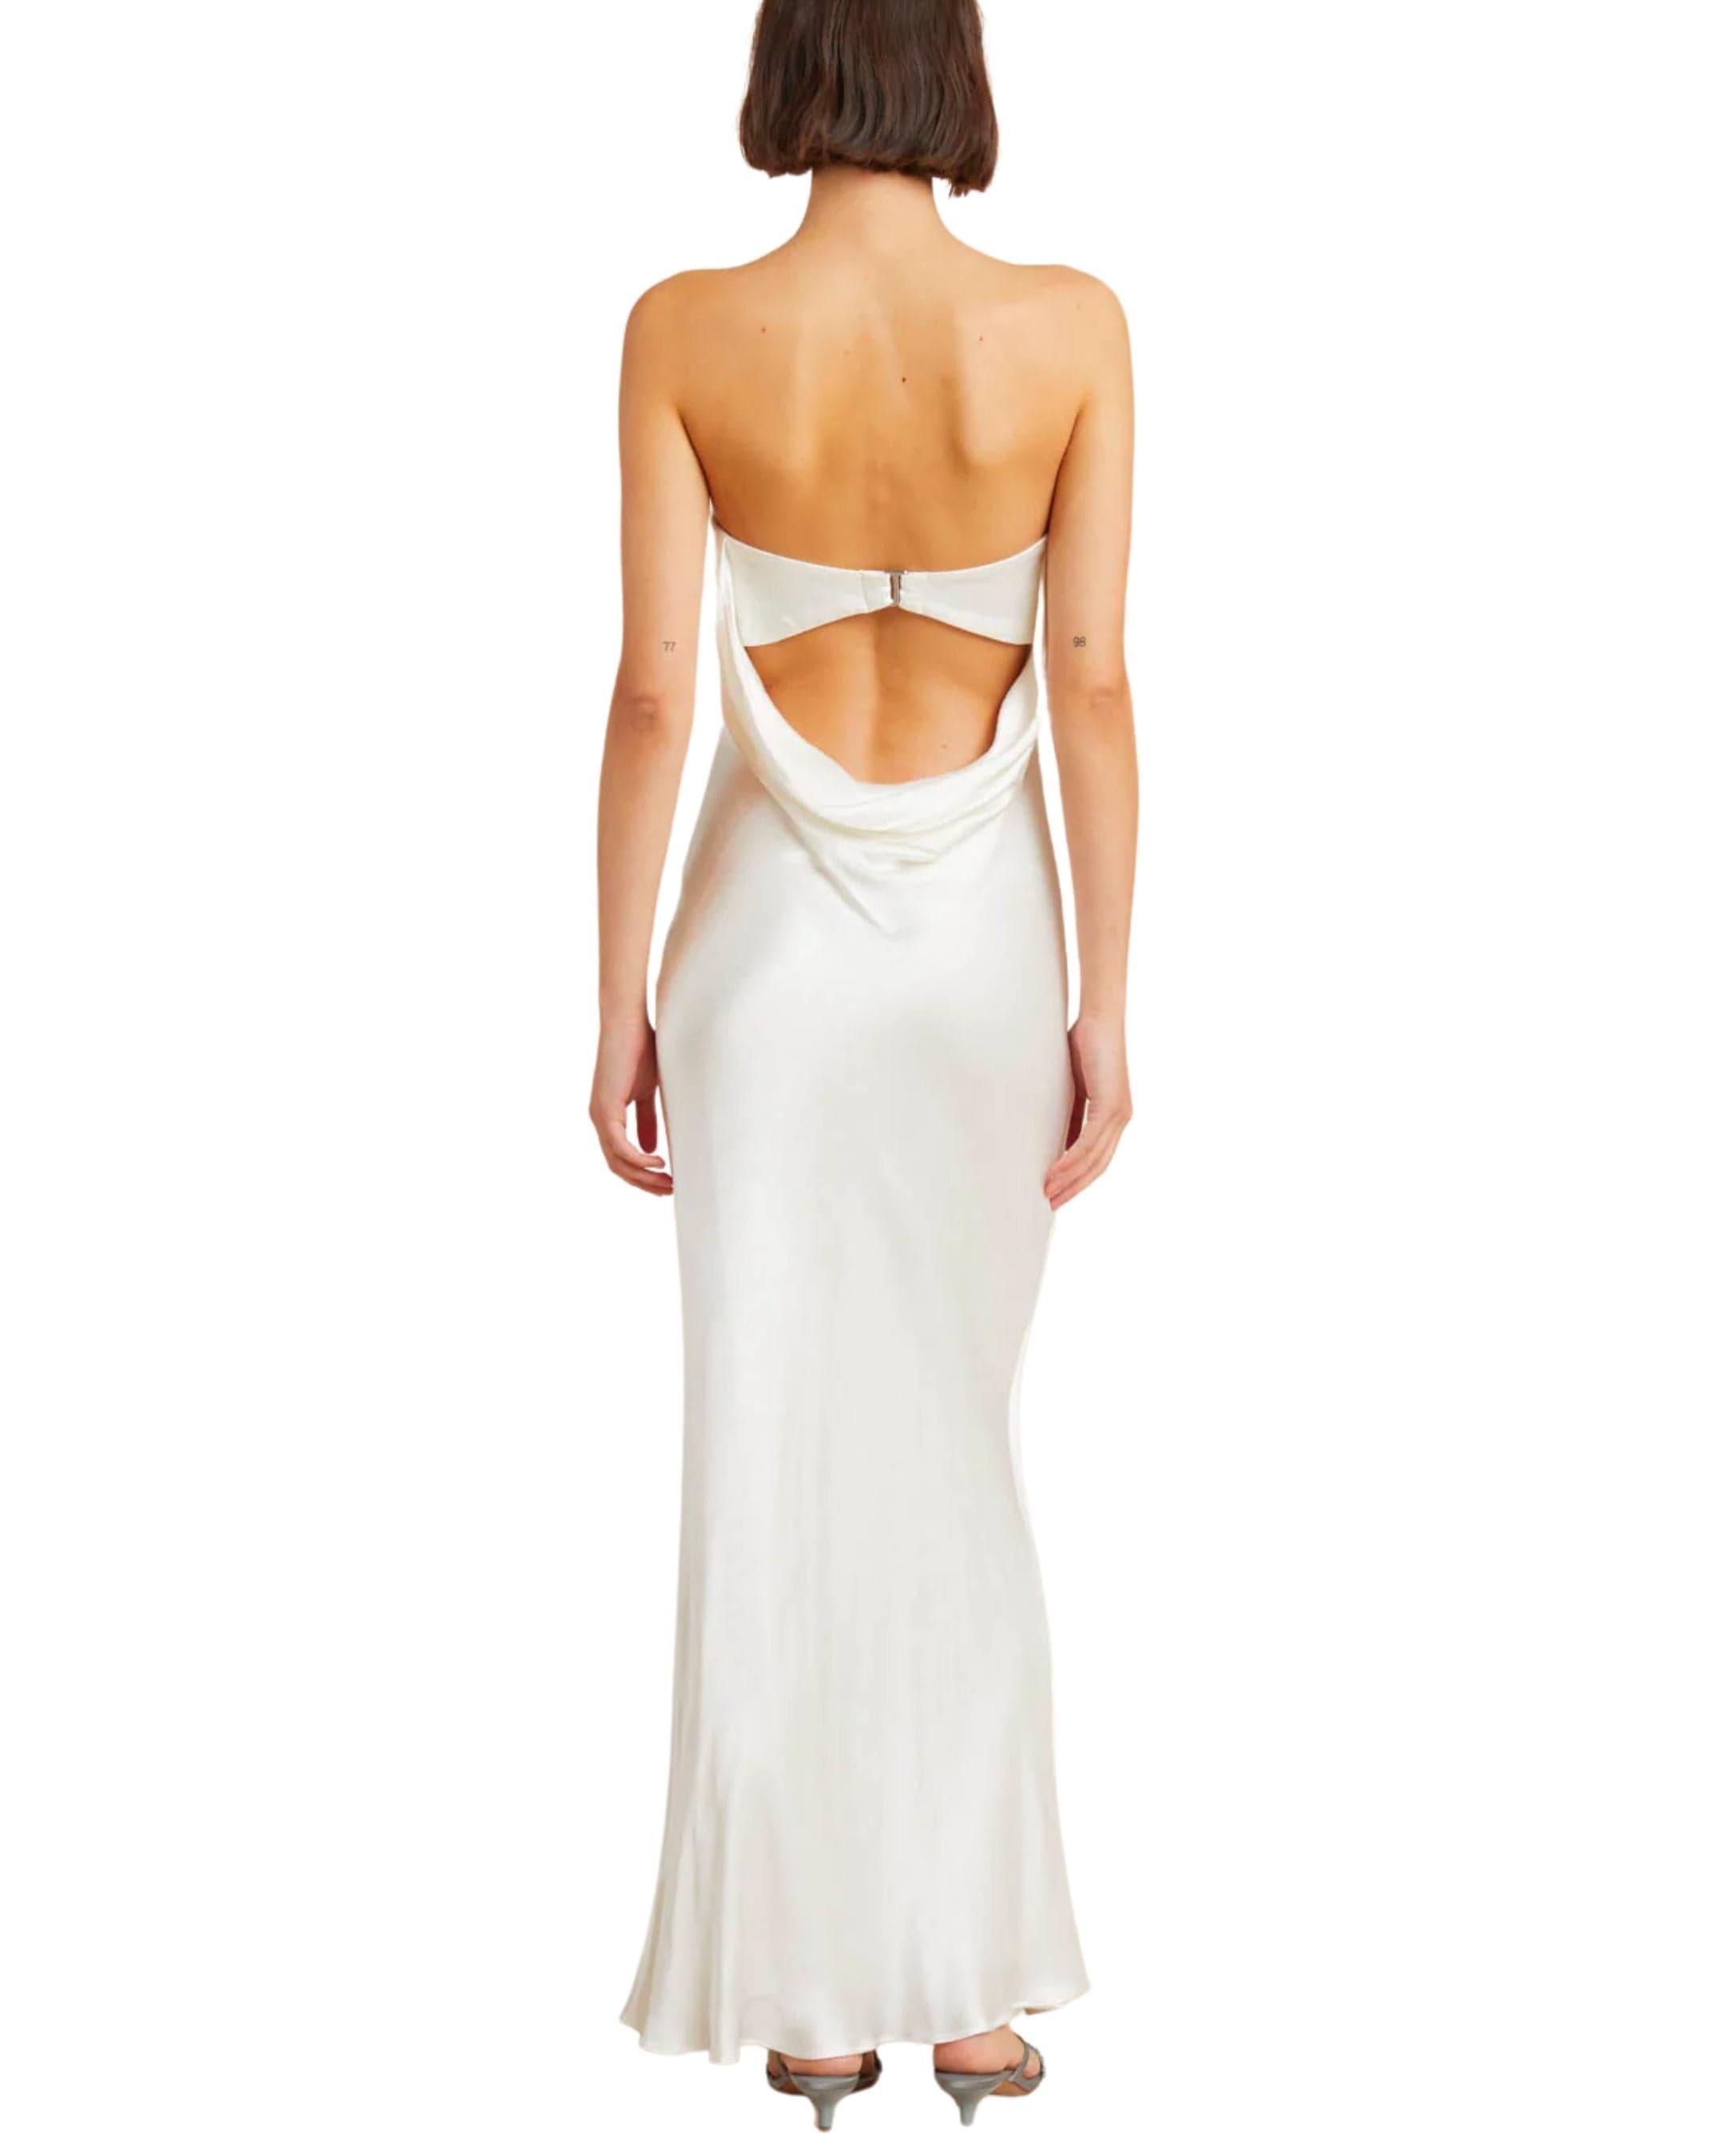 Moon Dance Strapless Dress in Ivory